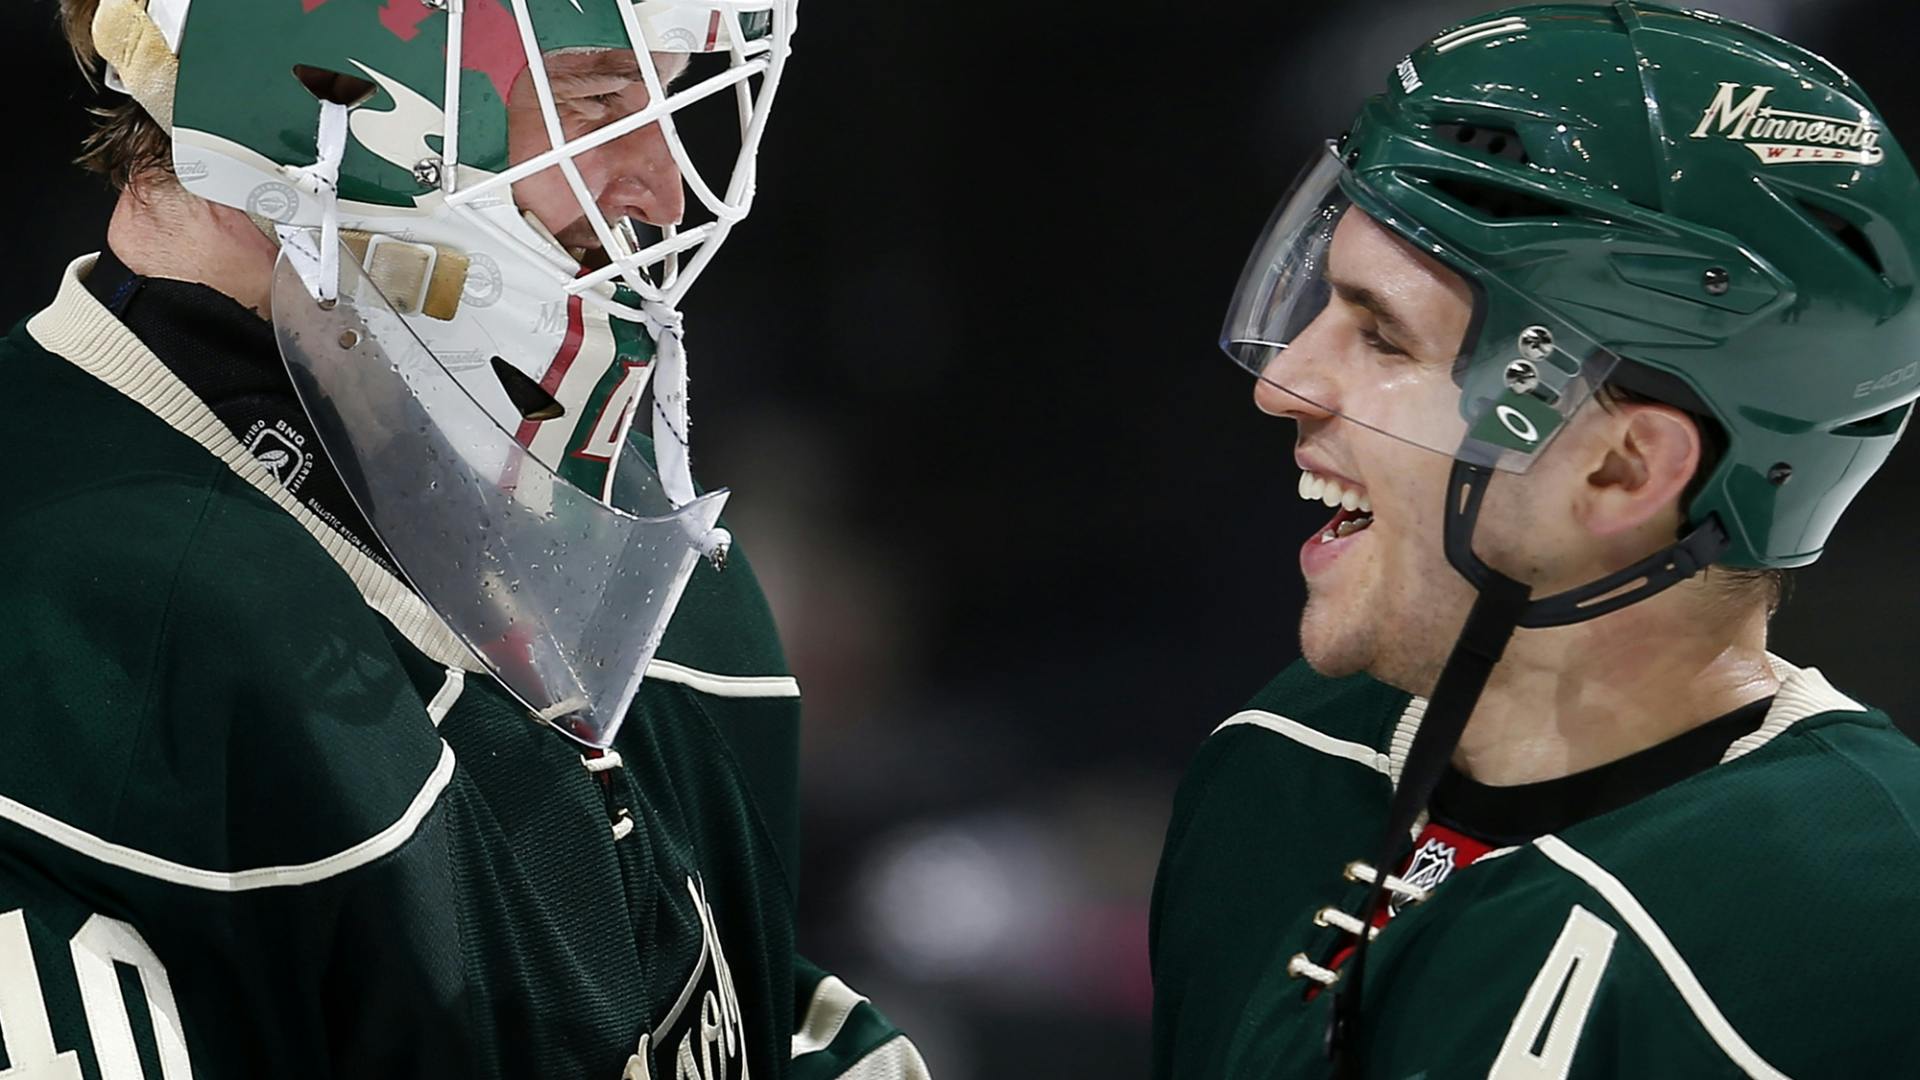 Blackhawks have knocked out the Wild each of the past two seasons